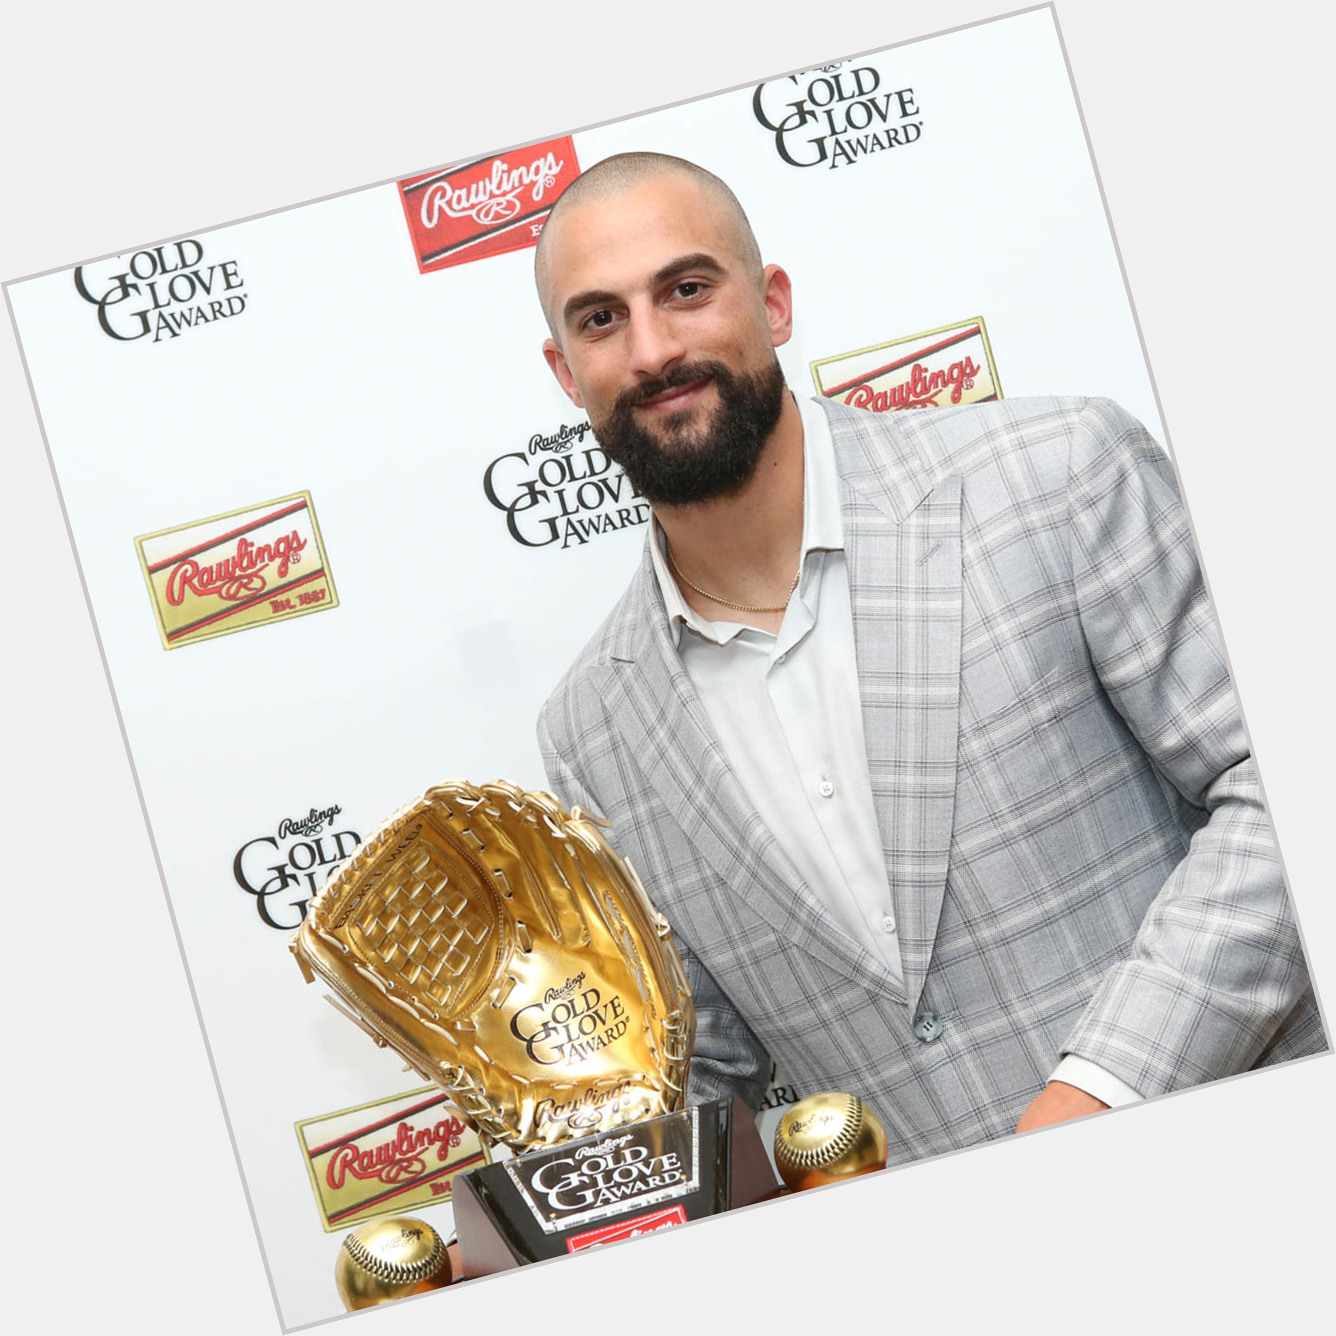 Happy 32nd birthday to Rawlings Pro and two-time winner Nick Markakis of the 